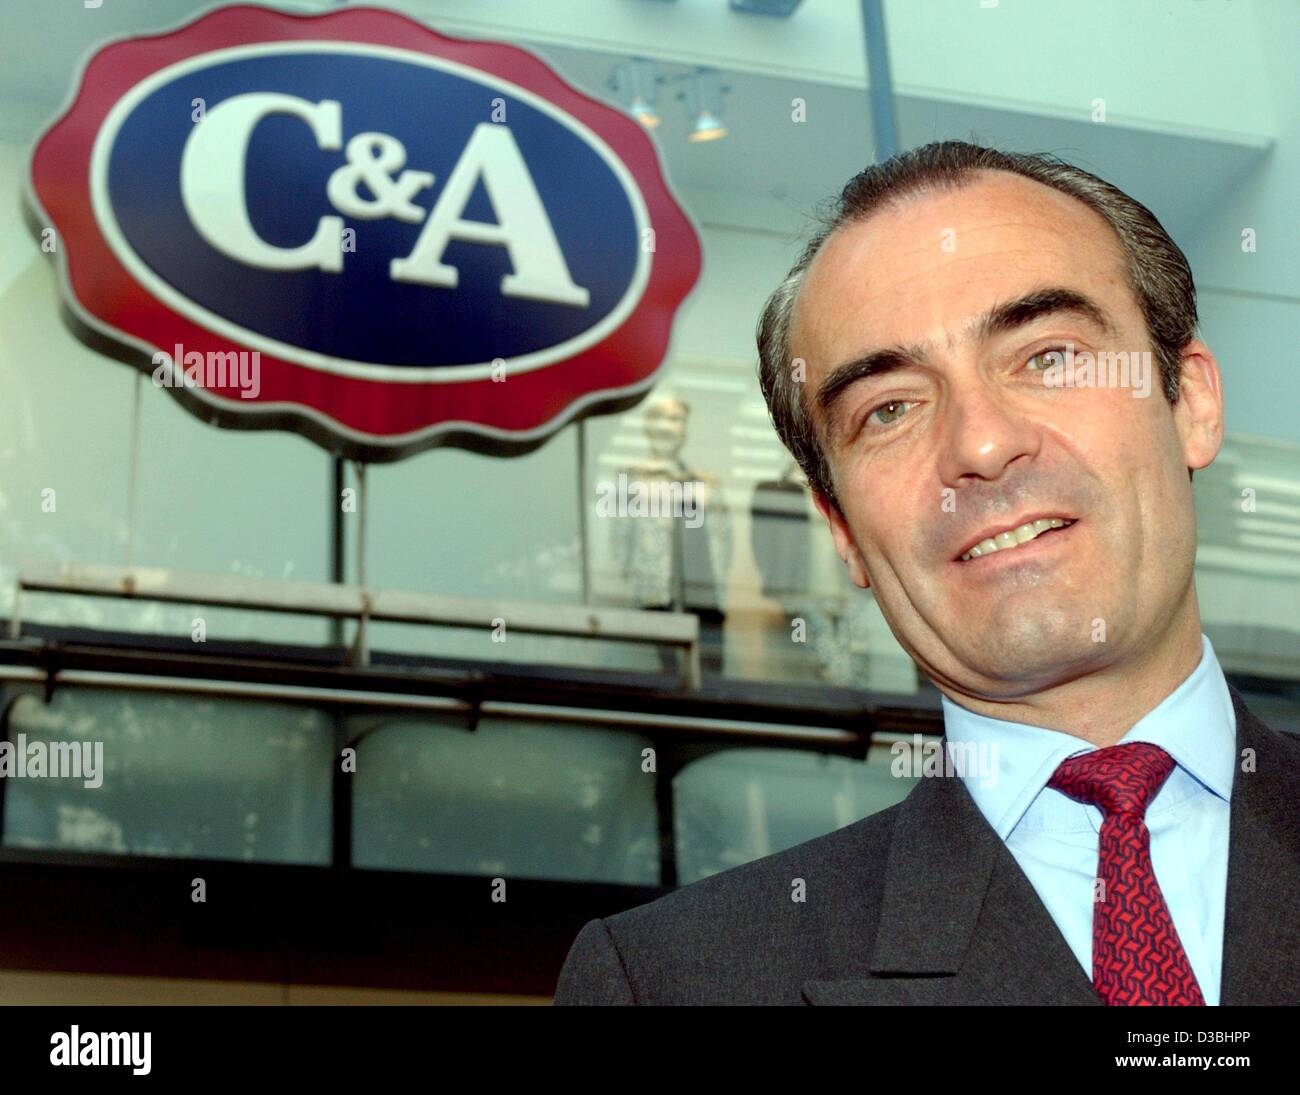 (dpa) - Dominic Brenninkmeyer, CEO of the German division of the Dutch fashion retailer C&A, stands in front of the entrance of a C&A branch store and smiles in Duesseldorf, Germany, 2 June 2003. Inspite of the difficult economic climate the C&A group has managed to increase their earnings. The prof Stock Photo